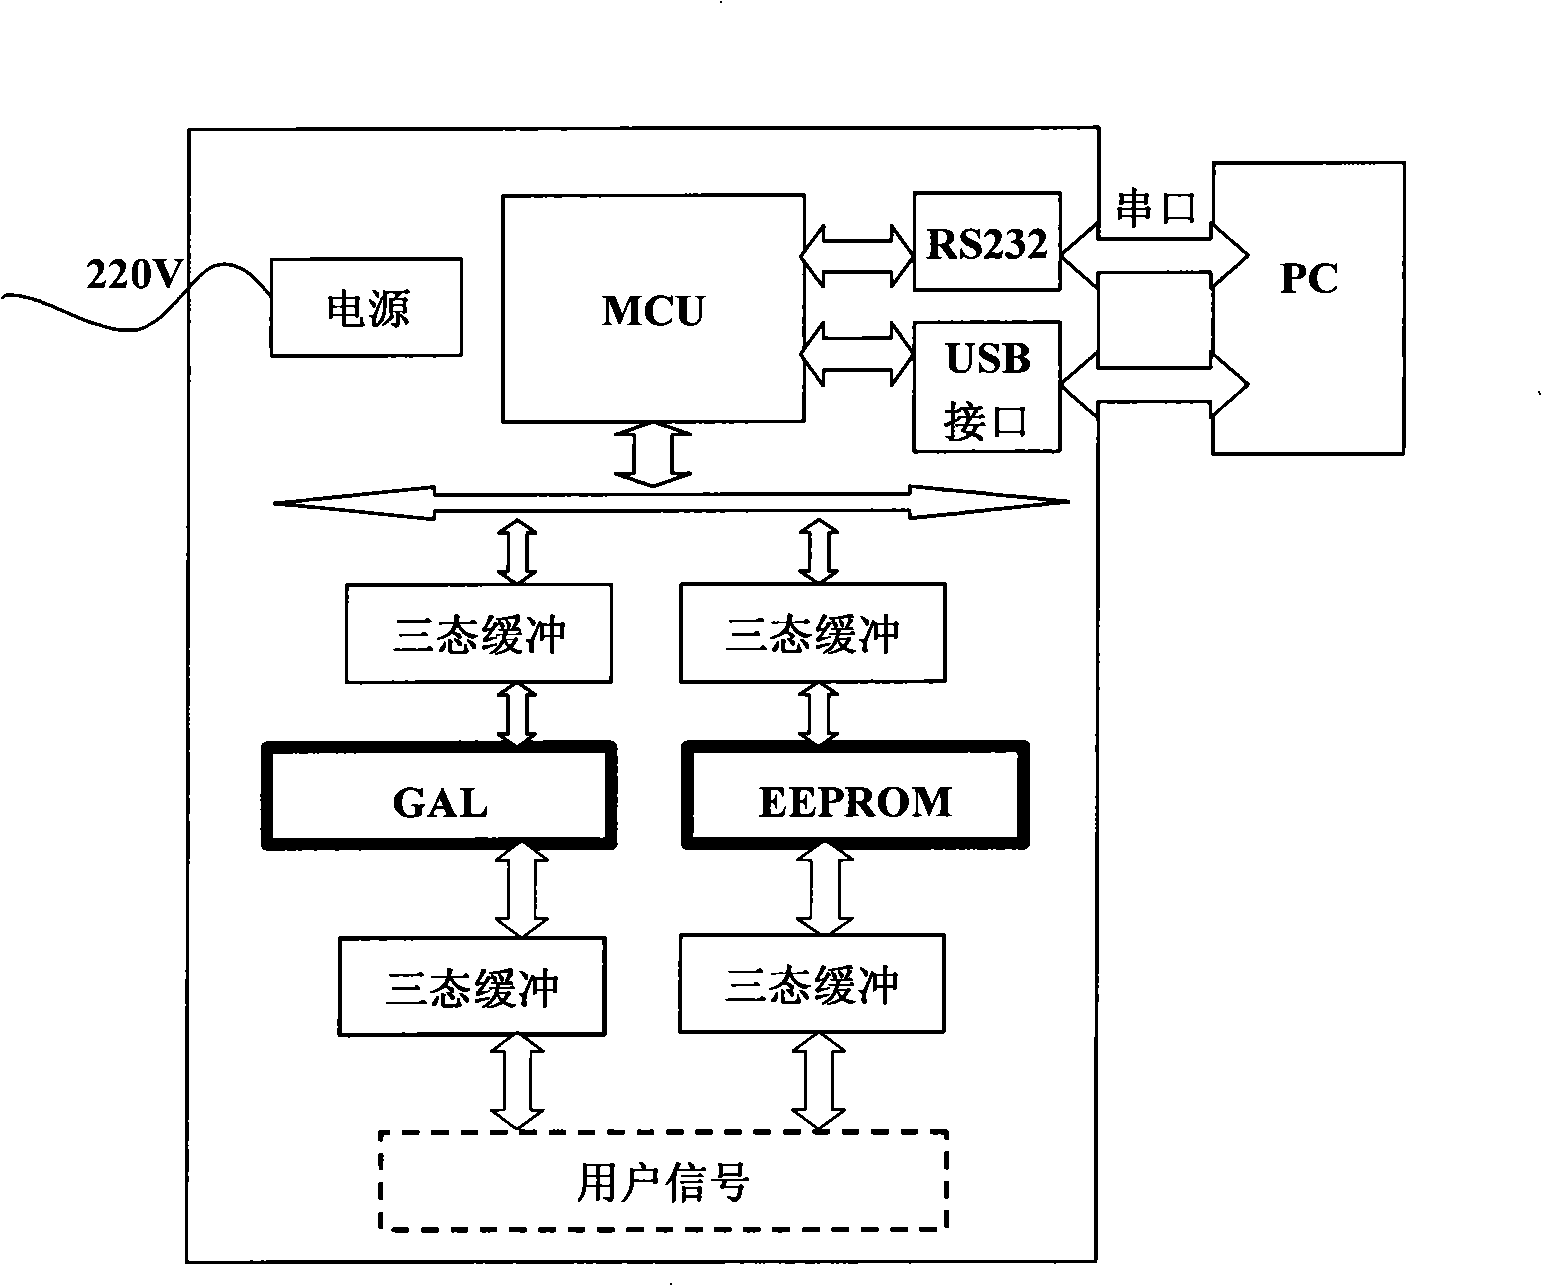 On-line programming apparatus for programmable logic device